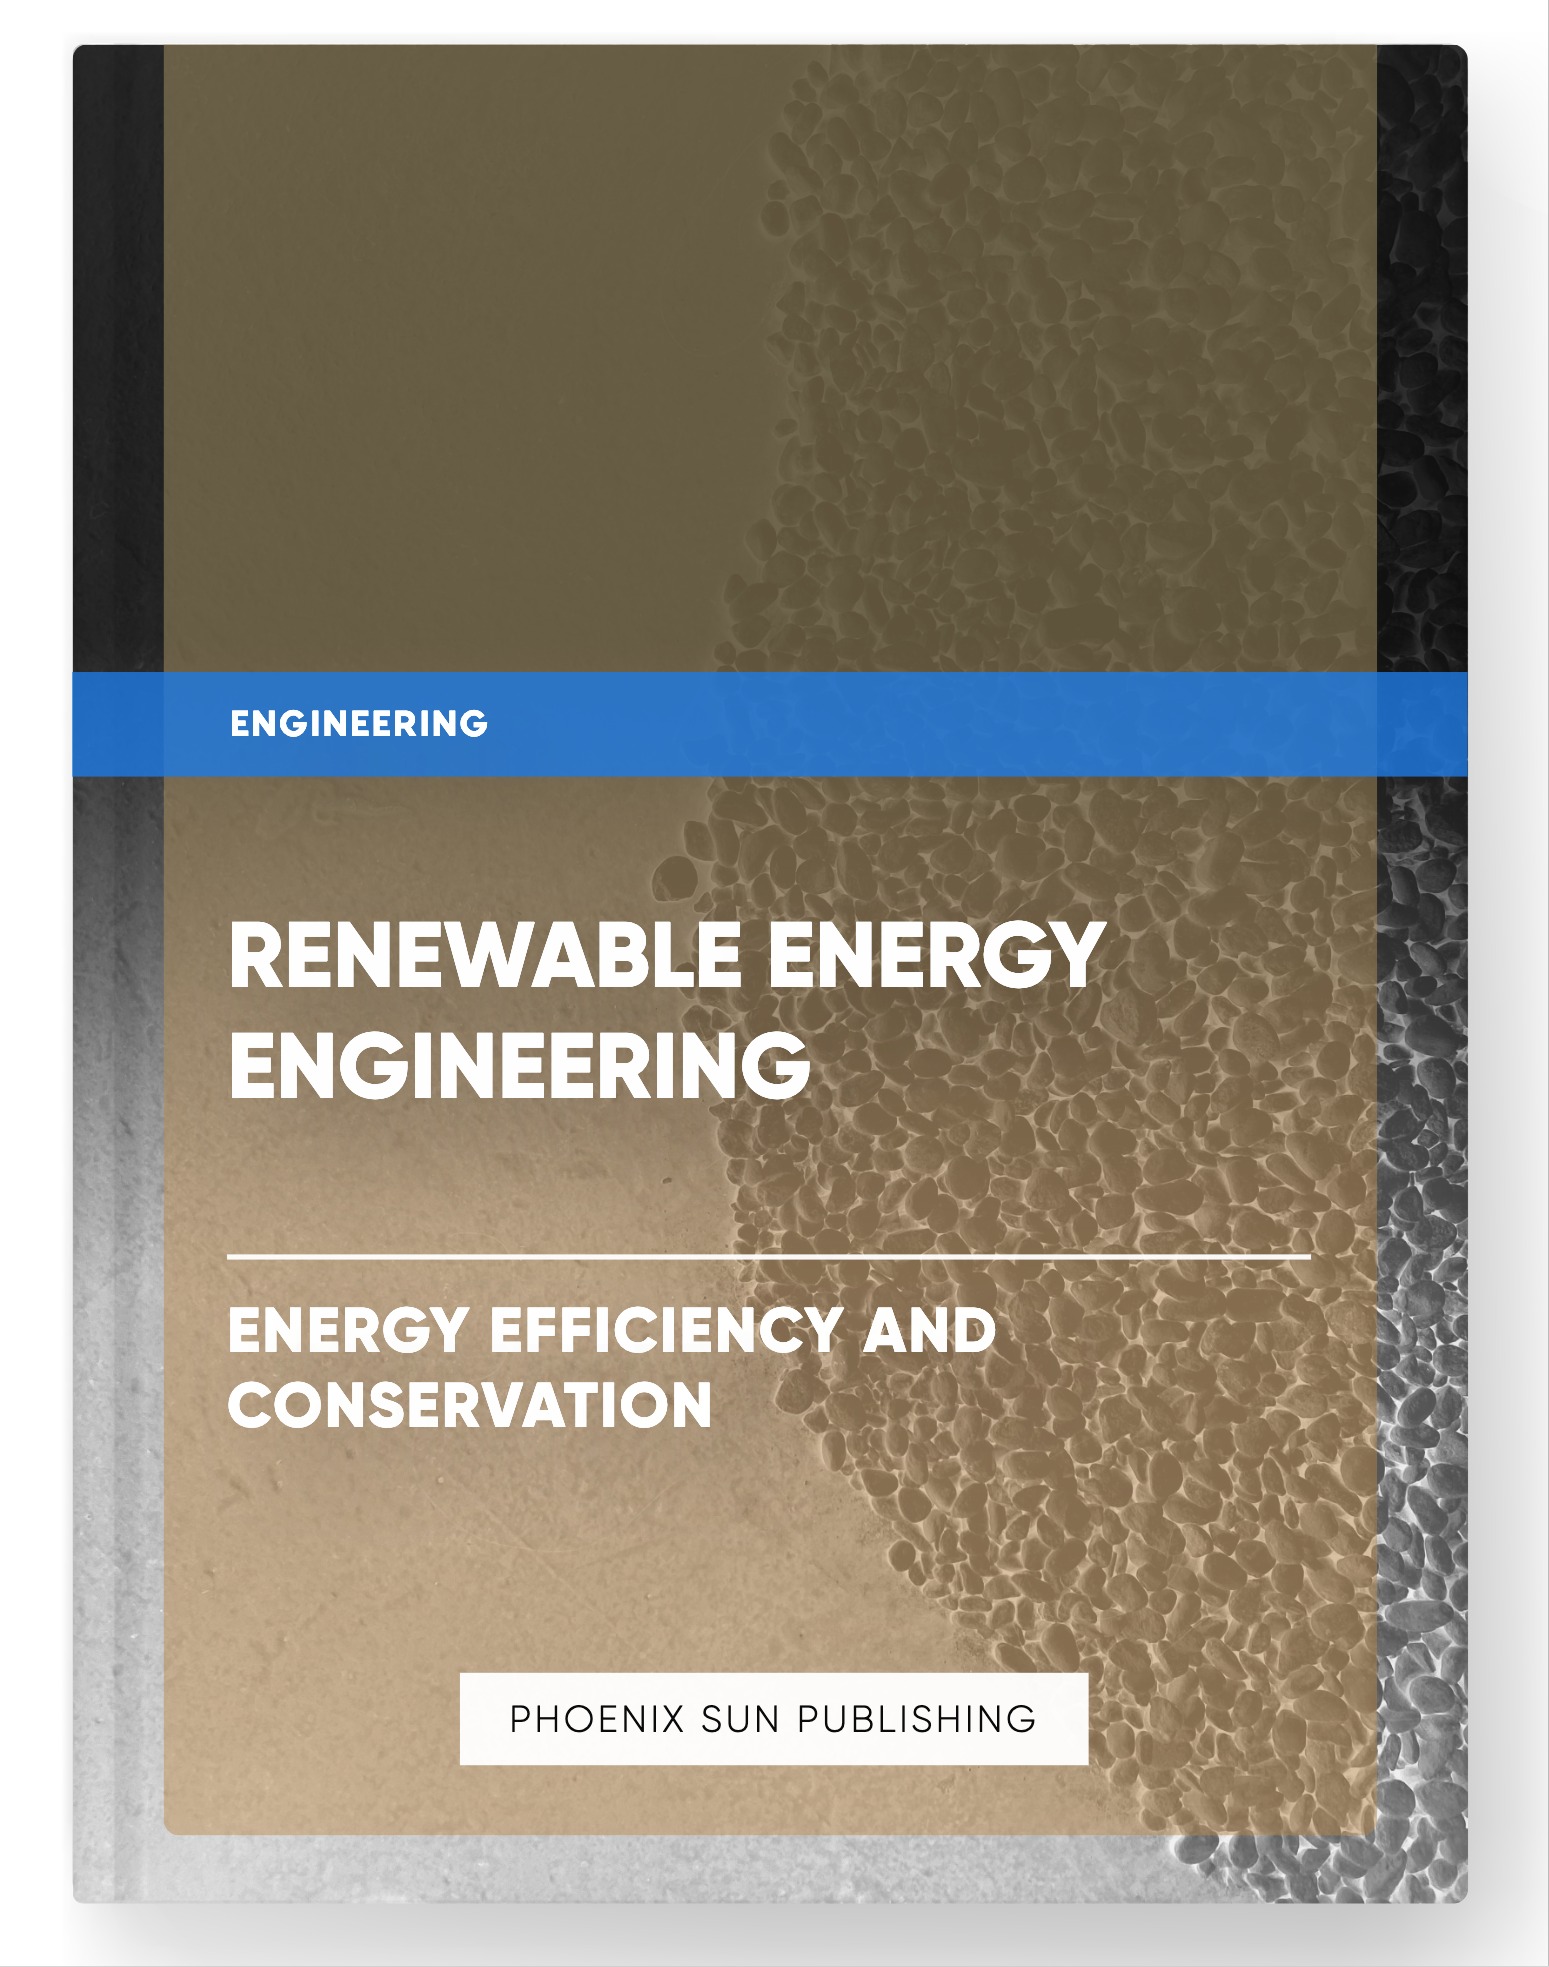 Renewable Energy Engineering – Energy Efficiency and Conservation